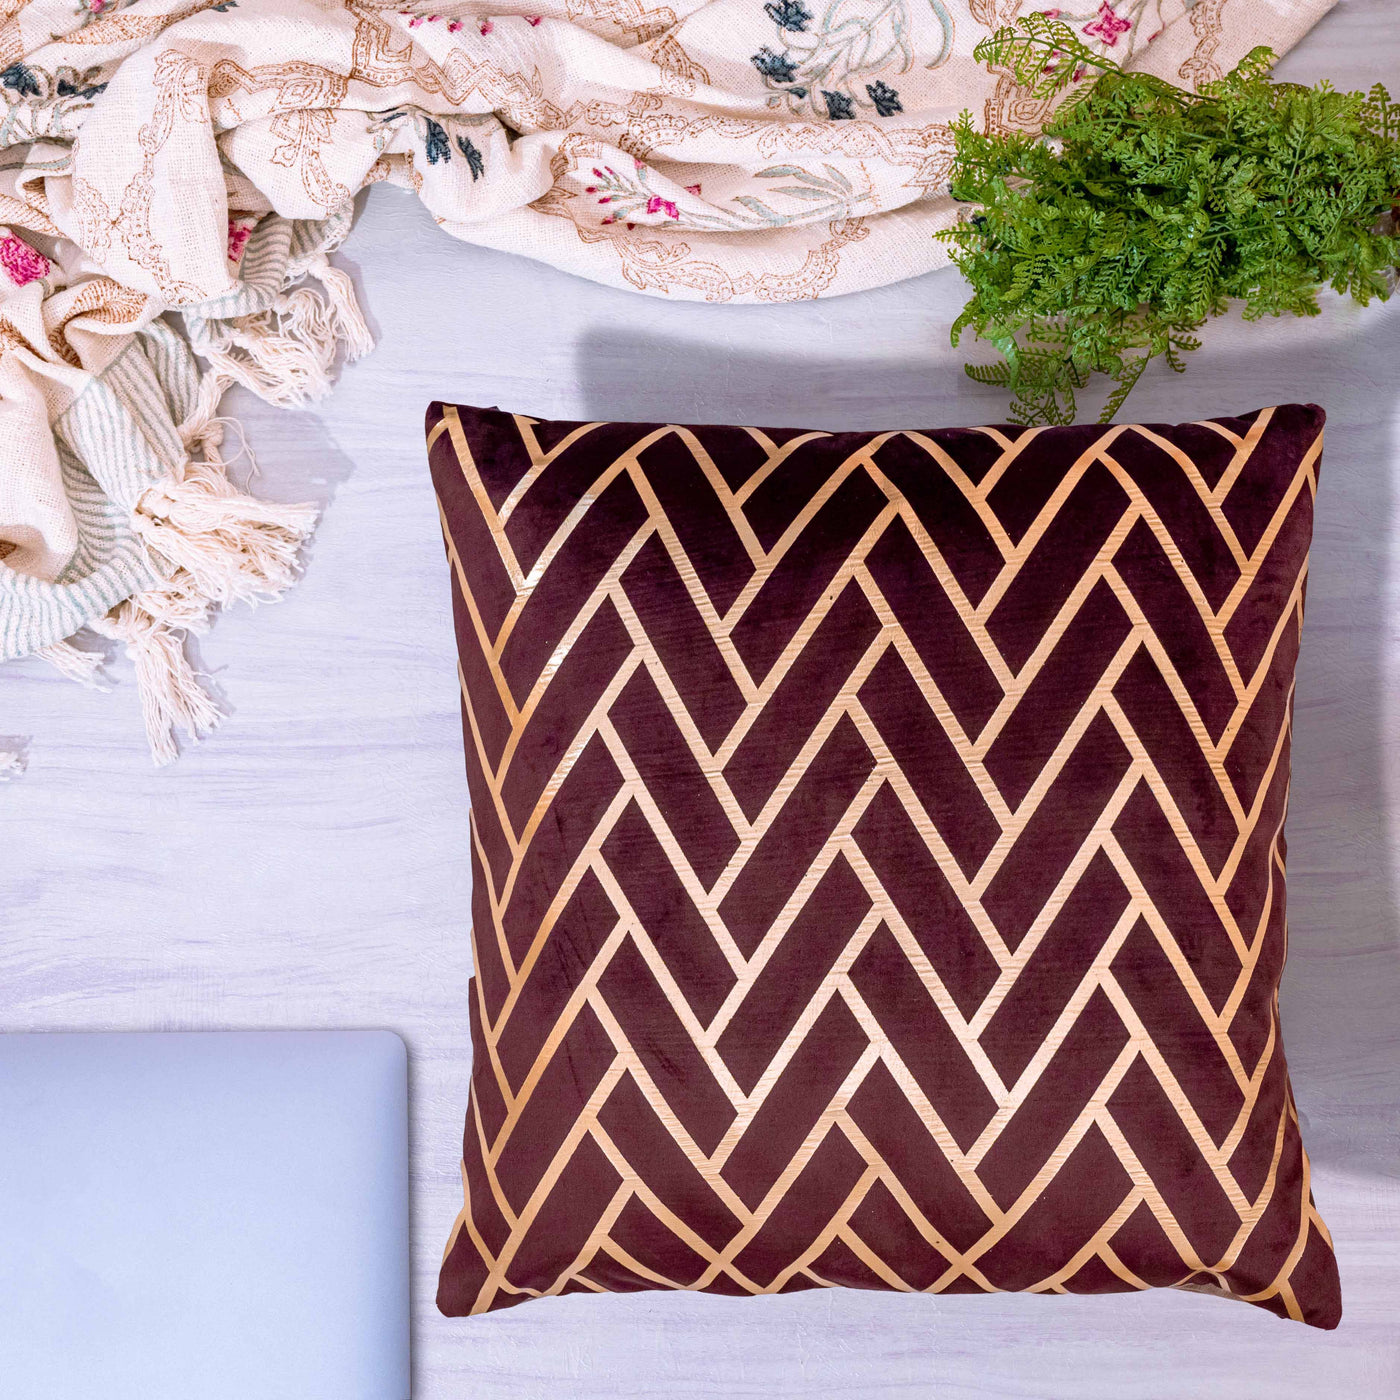 Gold and brown cushion cover by Home 360